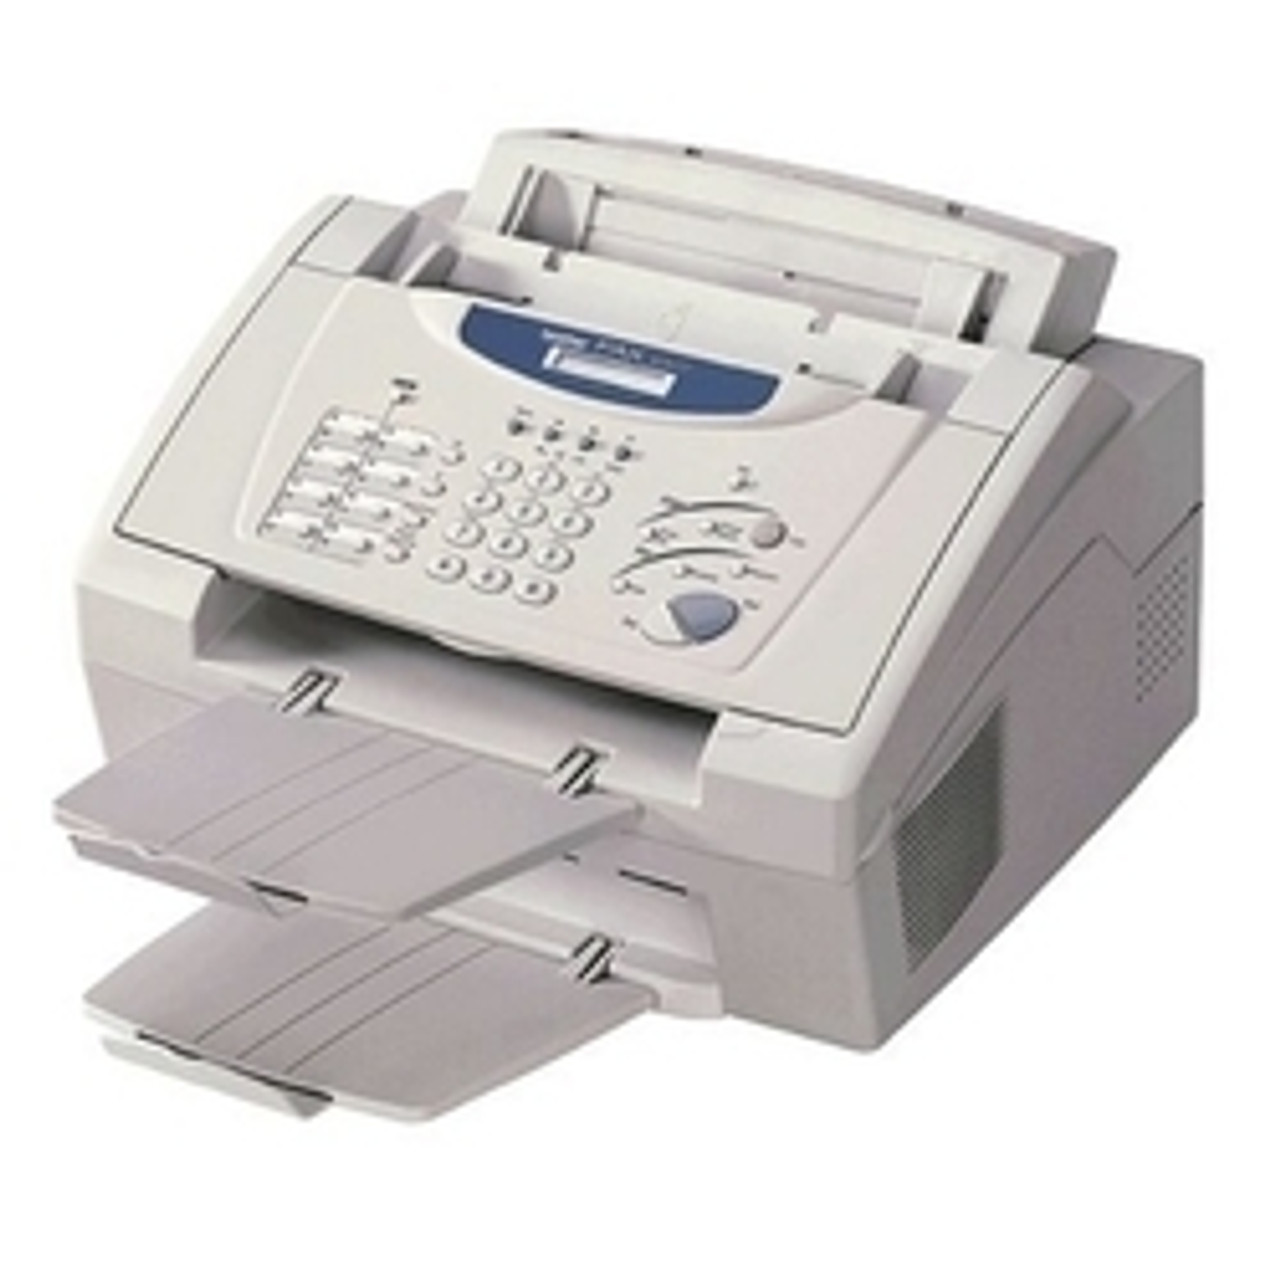 Brother Fax-8200